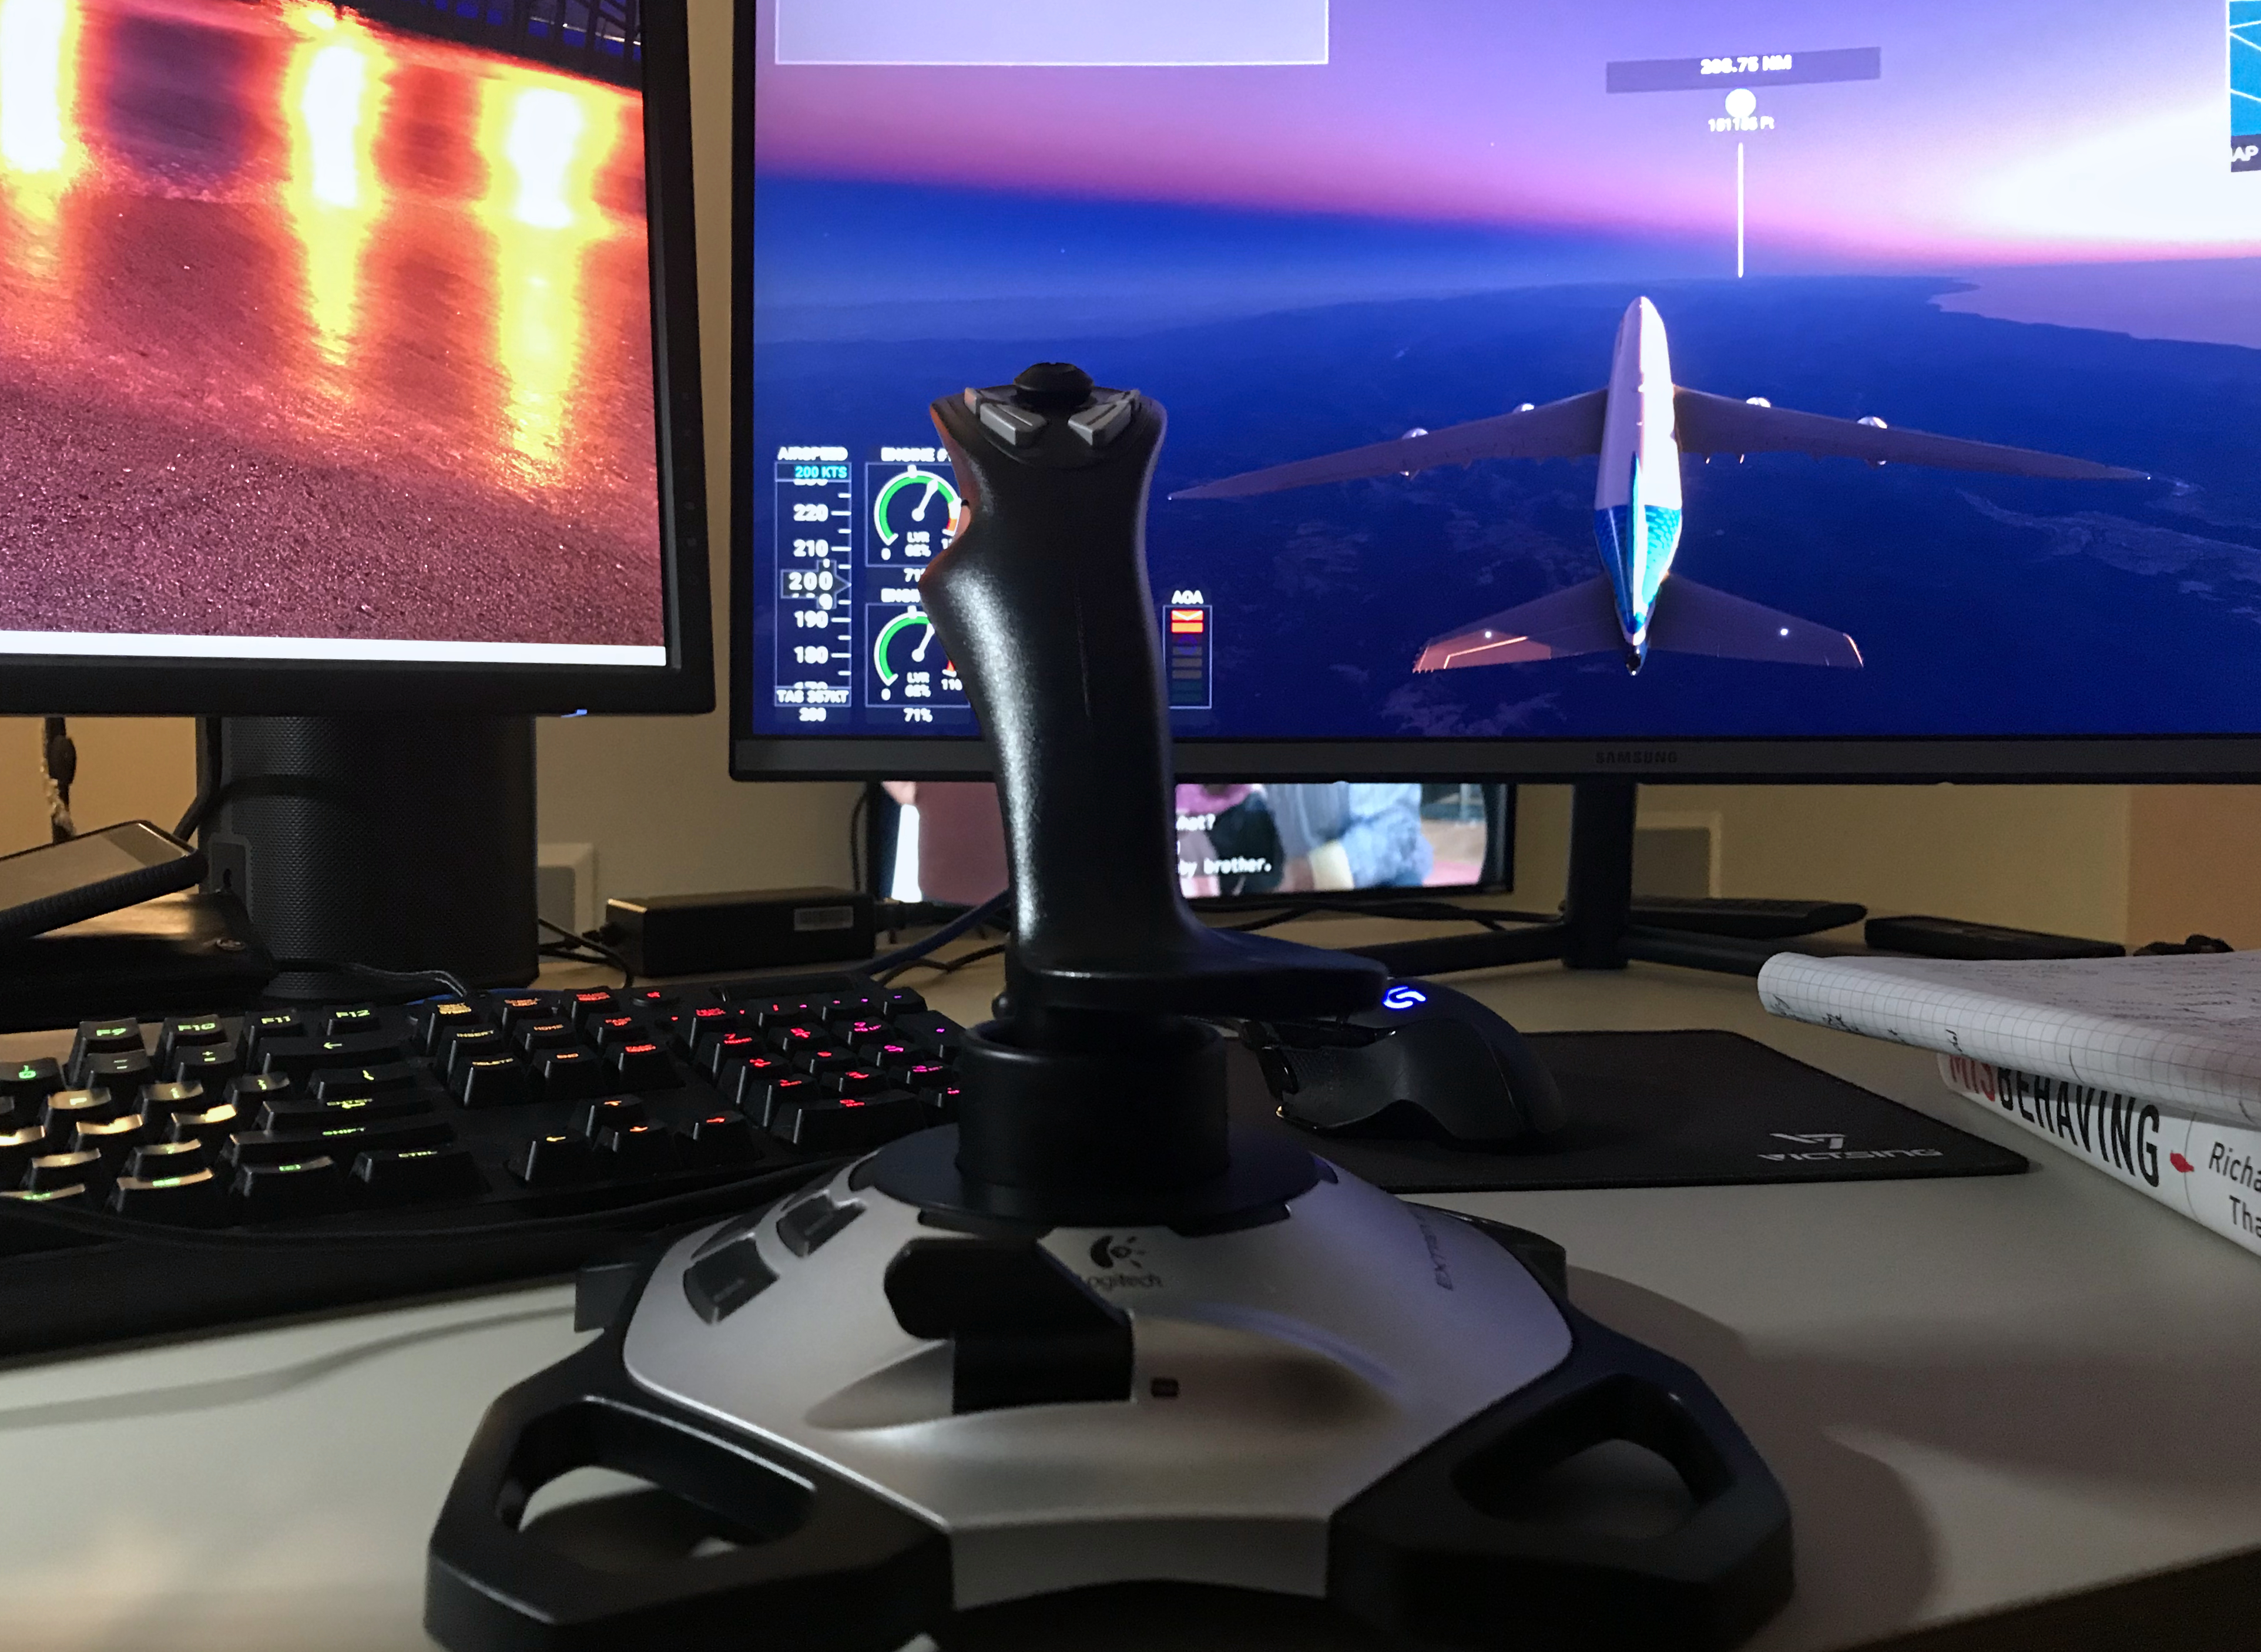 Playing Microsoft Flight Simulator with a joystick attached.